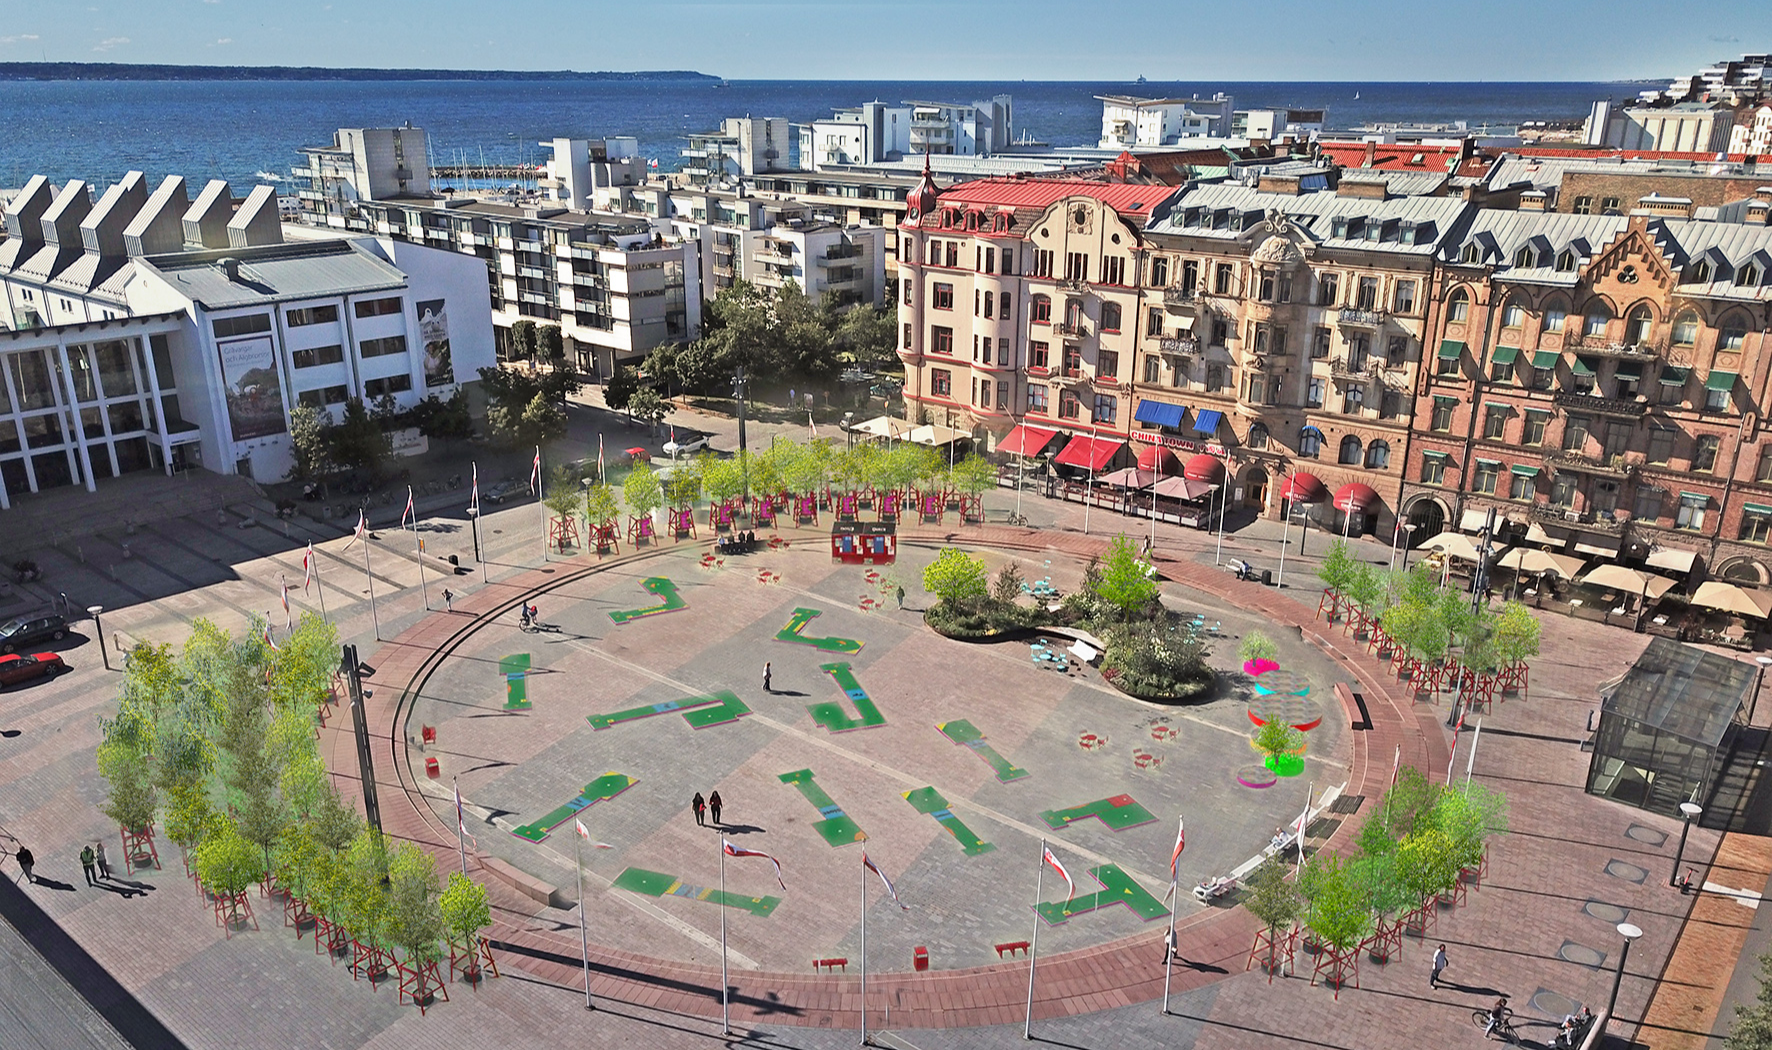 An areal photo of Helsingborg portable park. Minigolf and seating areas.